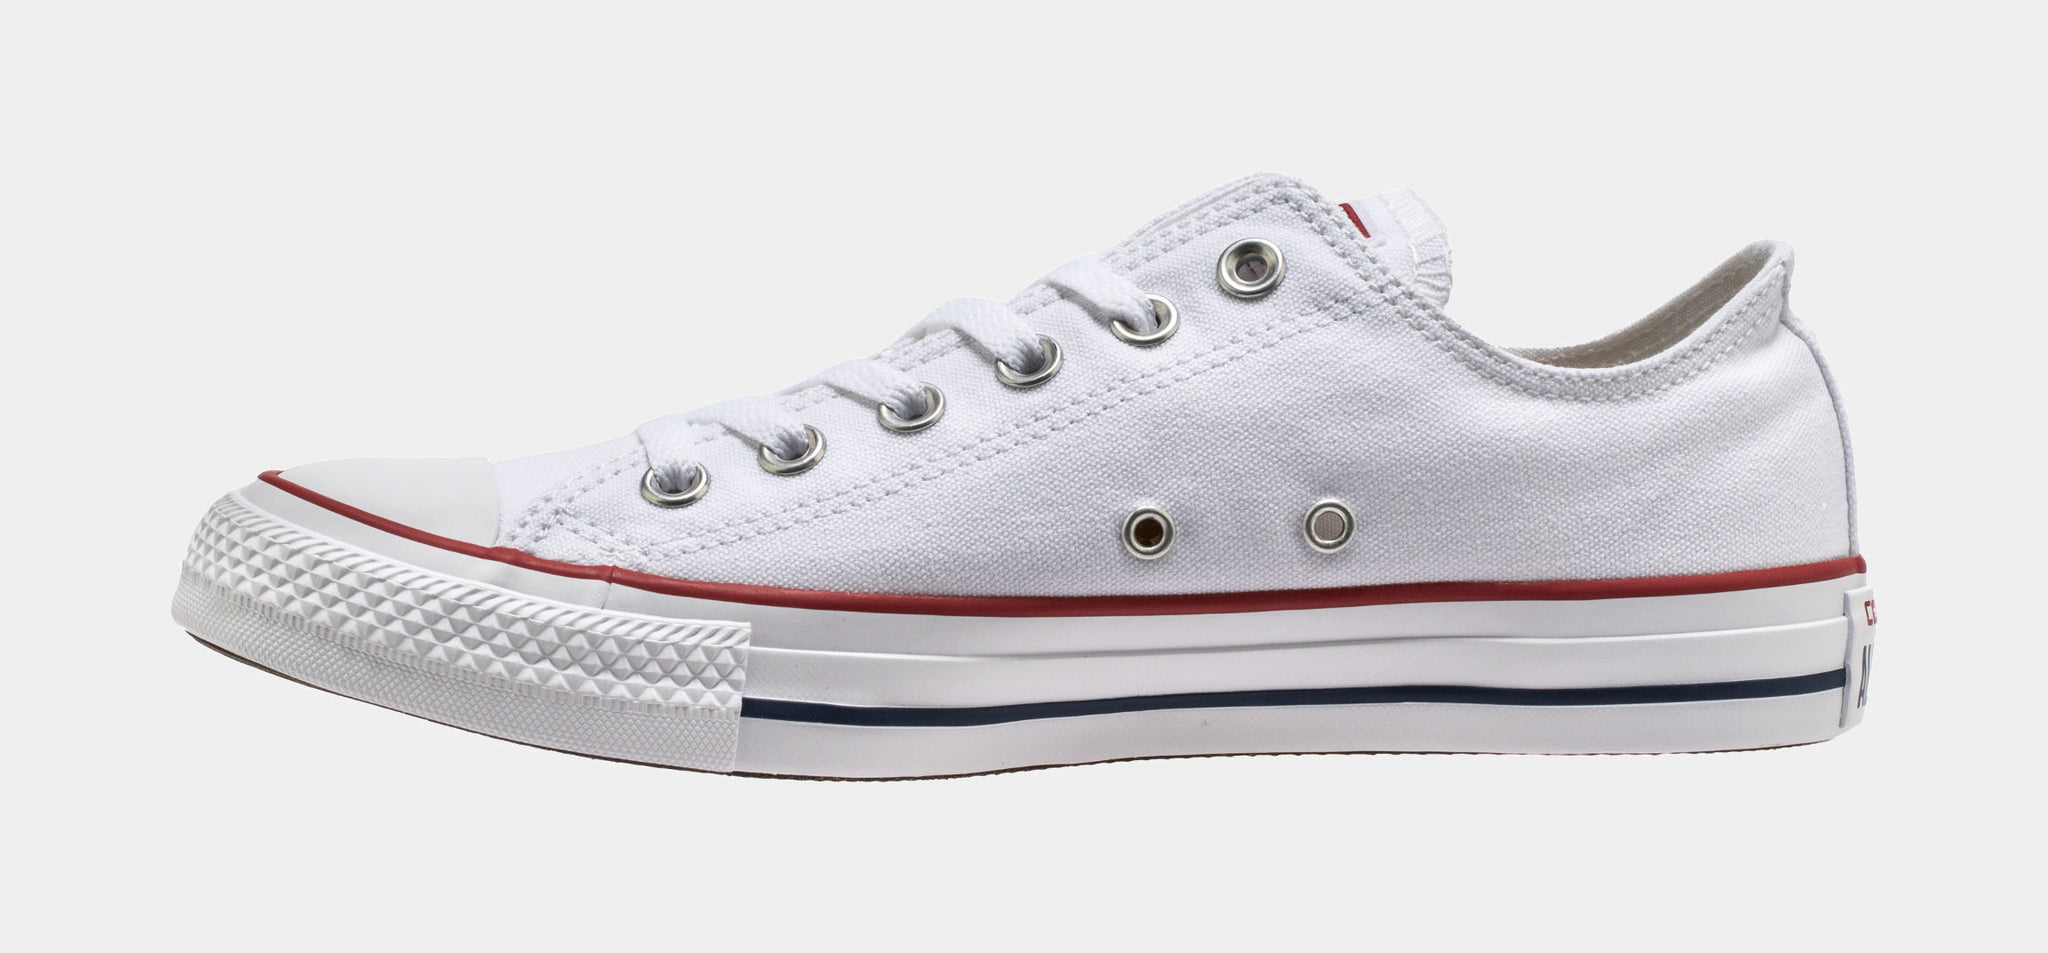 Converse Chuck Taylor All Star Classic Colors Low Solid Canvas Lifestyle Shoe Optical White M7652 – Shoe Palace